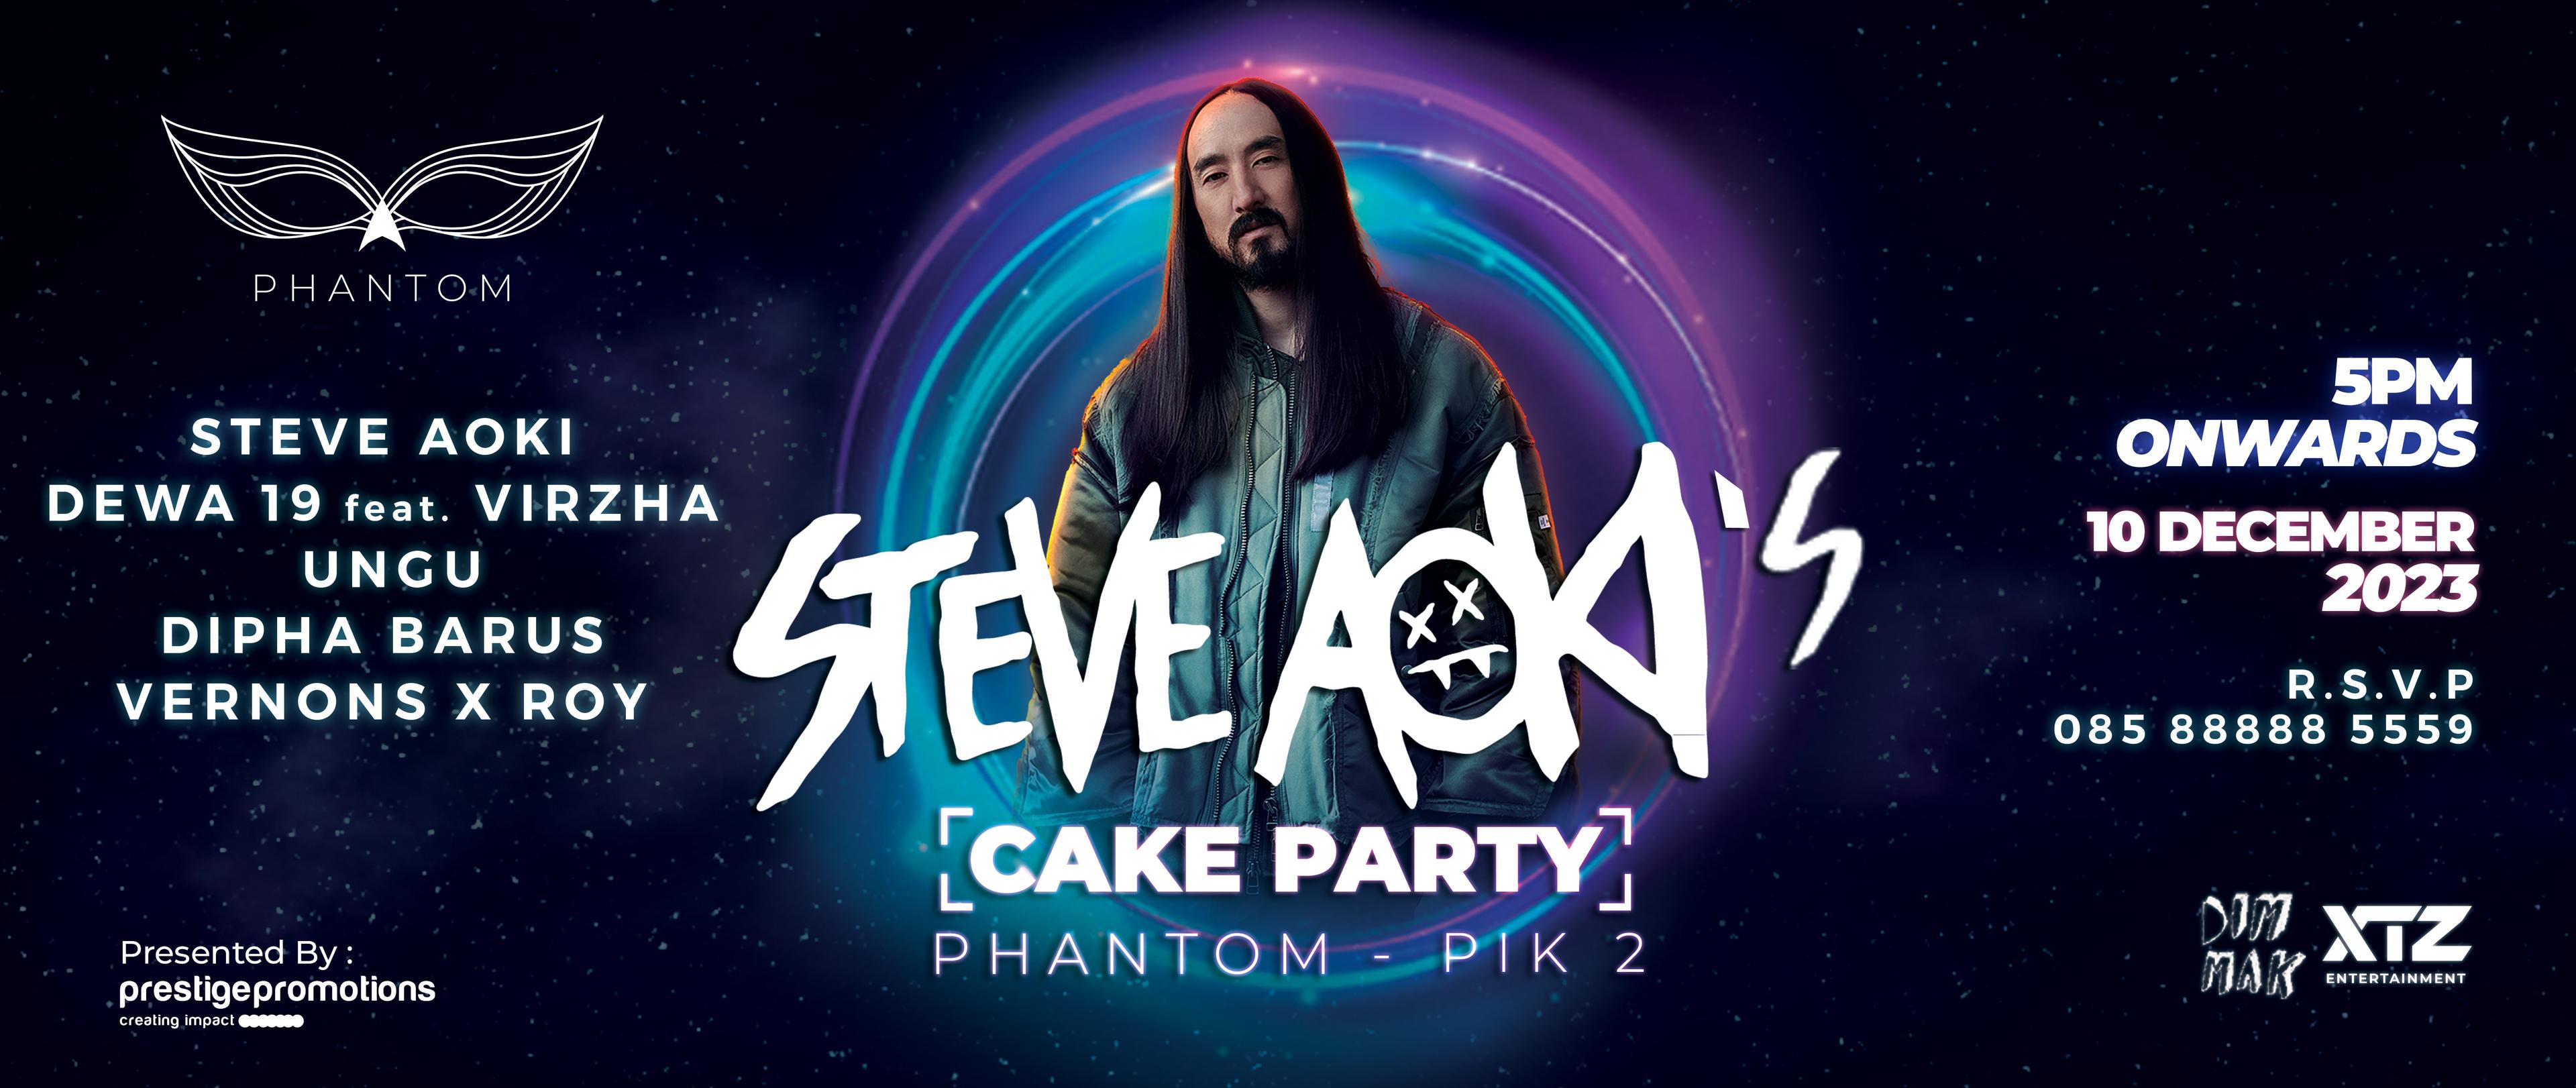 Elevate your party experience to a whole new level at Steve Aoki's Cake Party